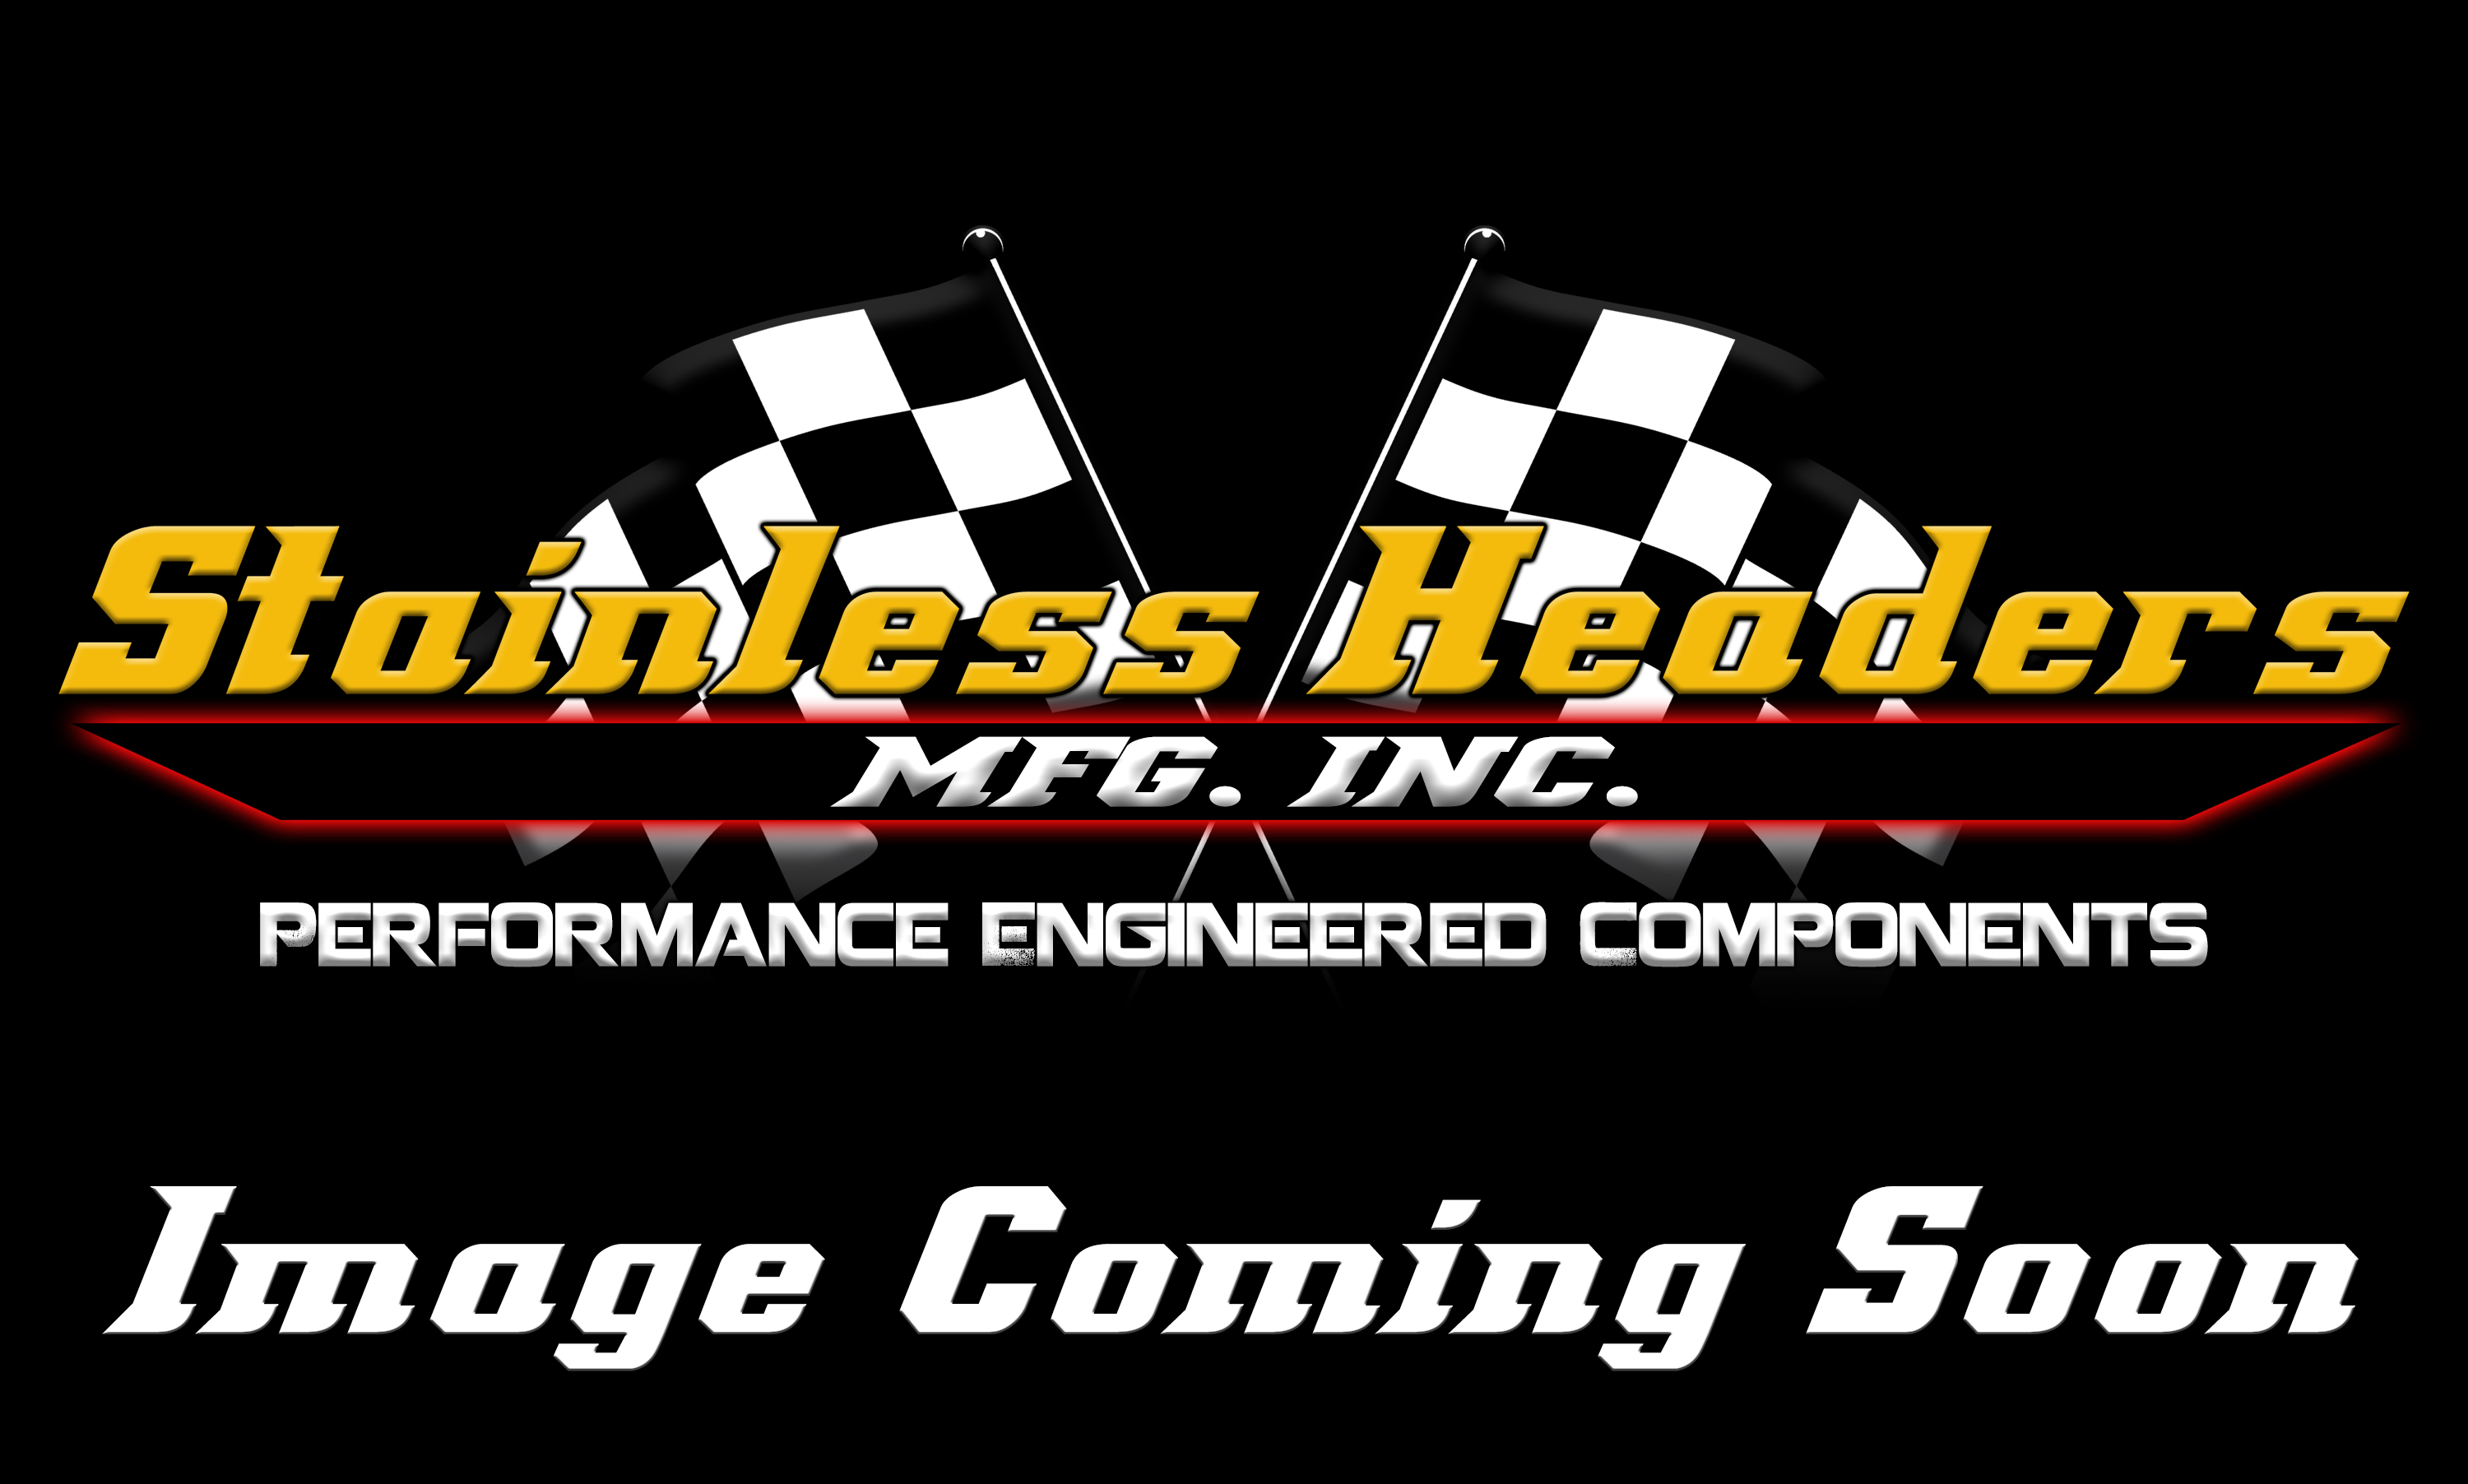 CompTurbo Technologies - CTR4202R-7485 Mid Frame 360 Journal Bearing Turbocharger (1300 HP) - Image 1